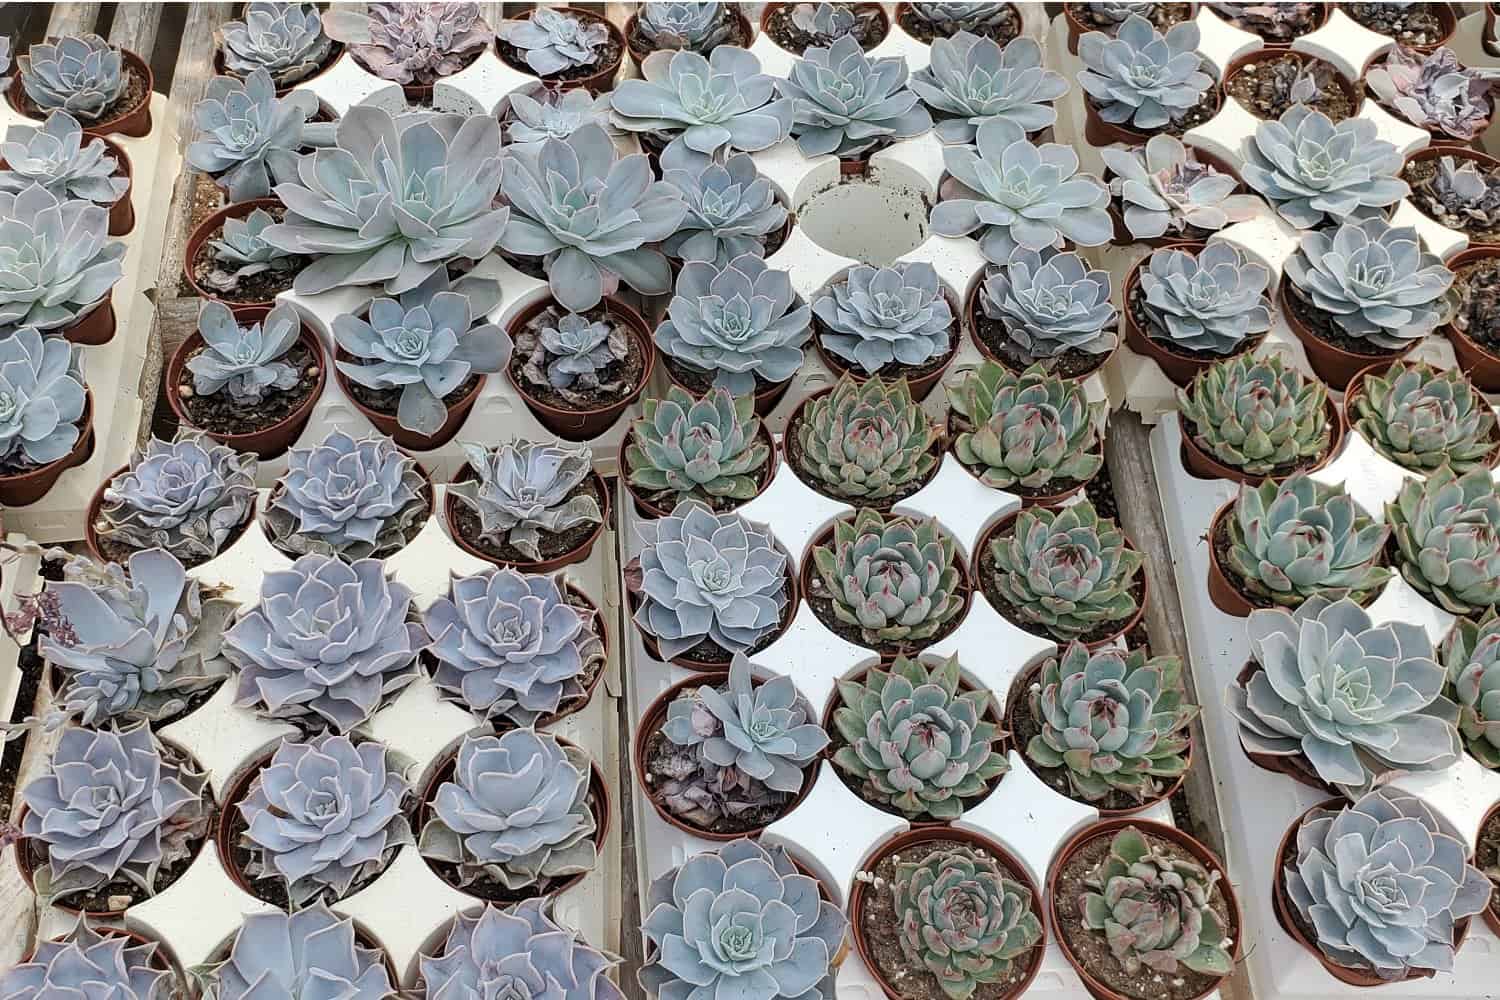 11 Trustworthy Stores to Buy Succulents (Online & Local)